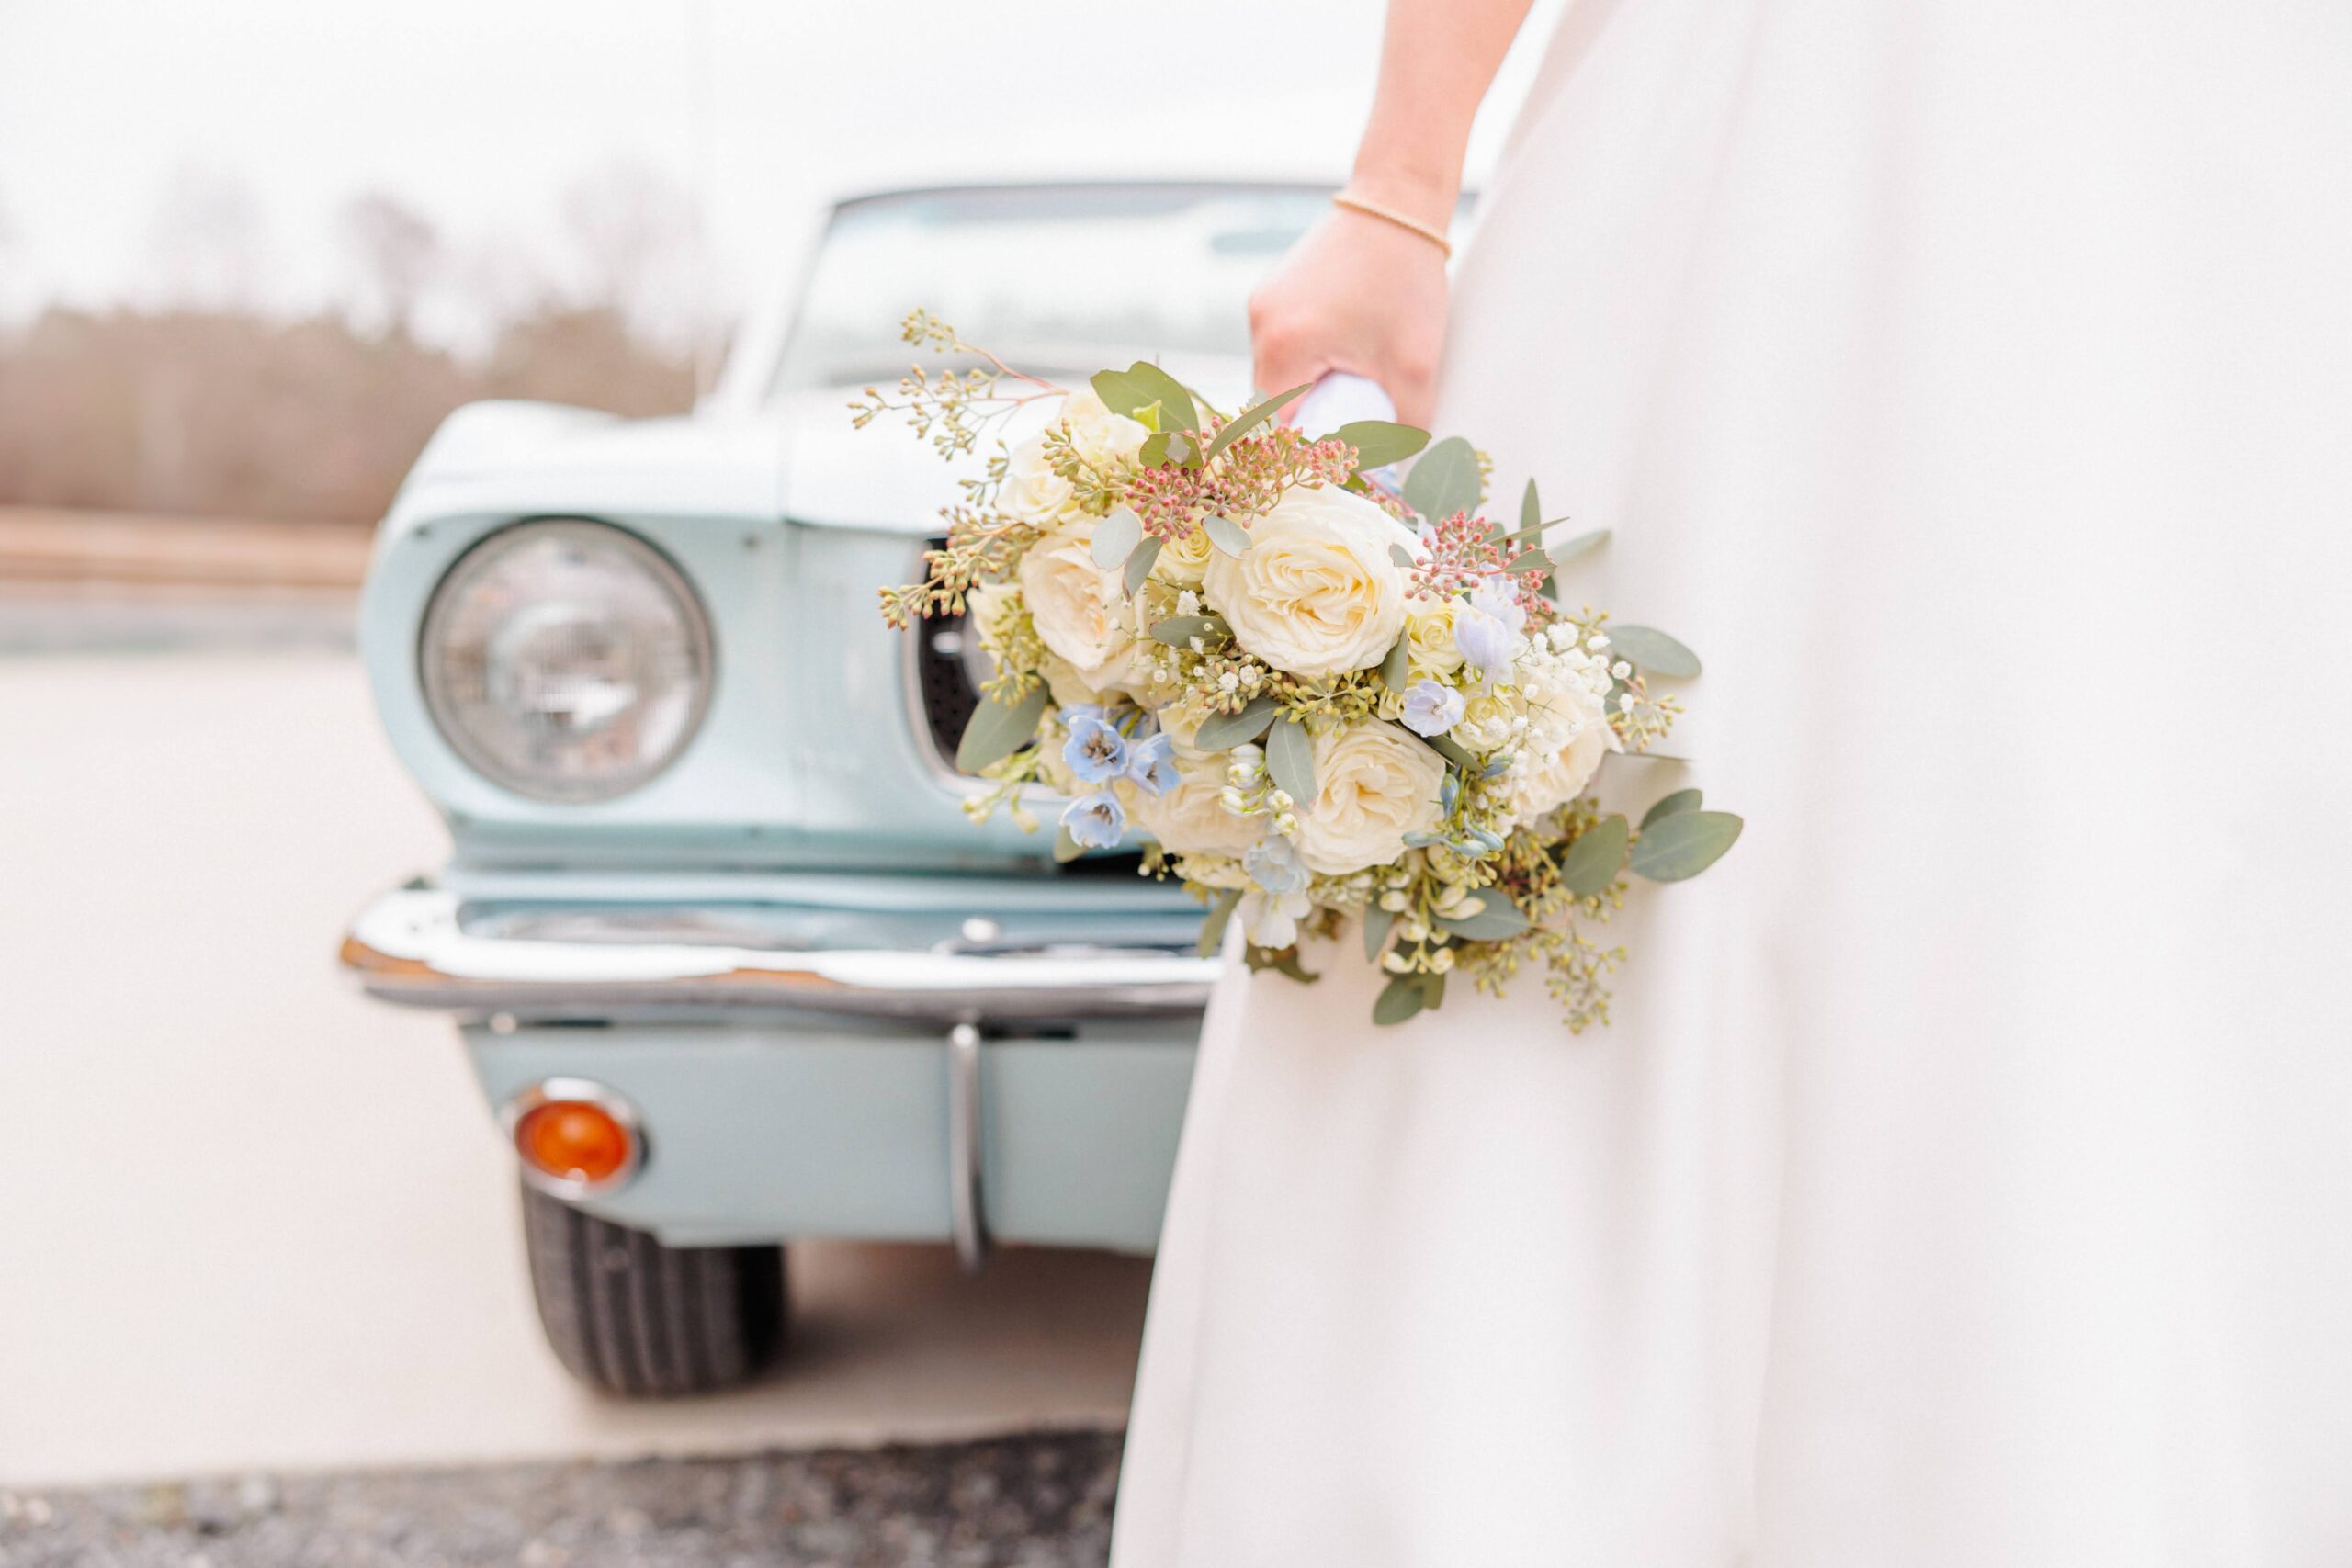 A bridal bouquet can be seen in front of the headlights of this vintage classic car.